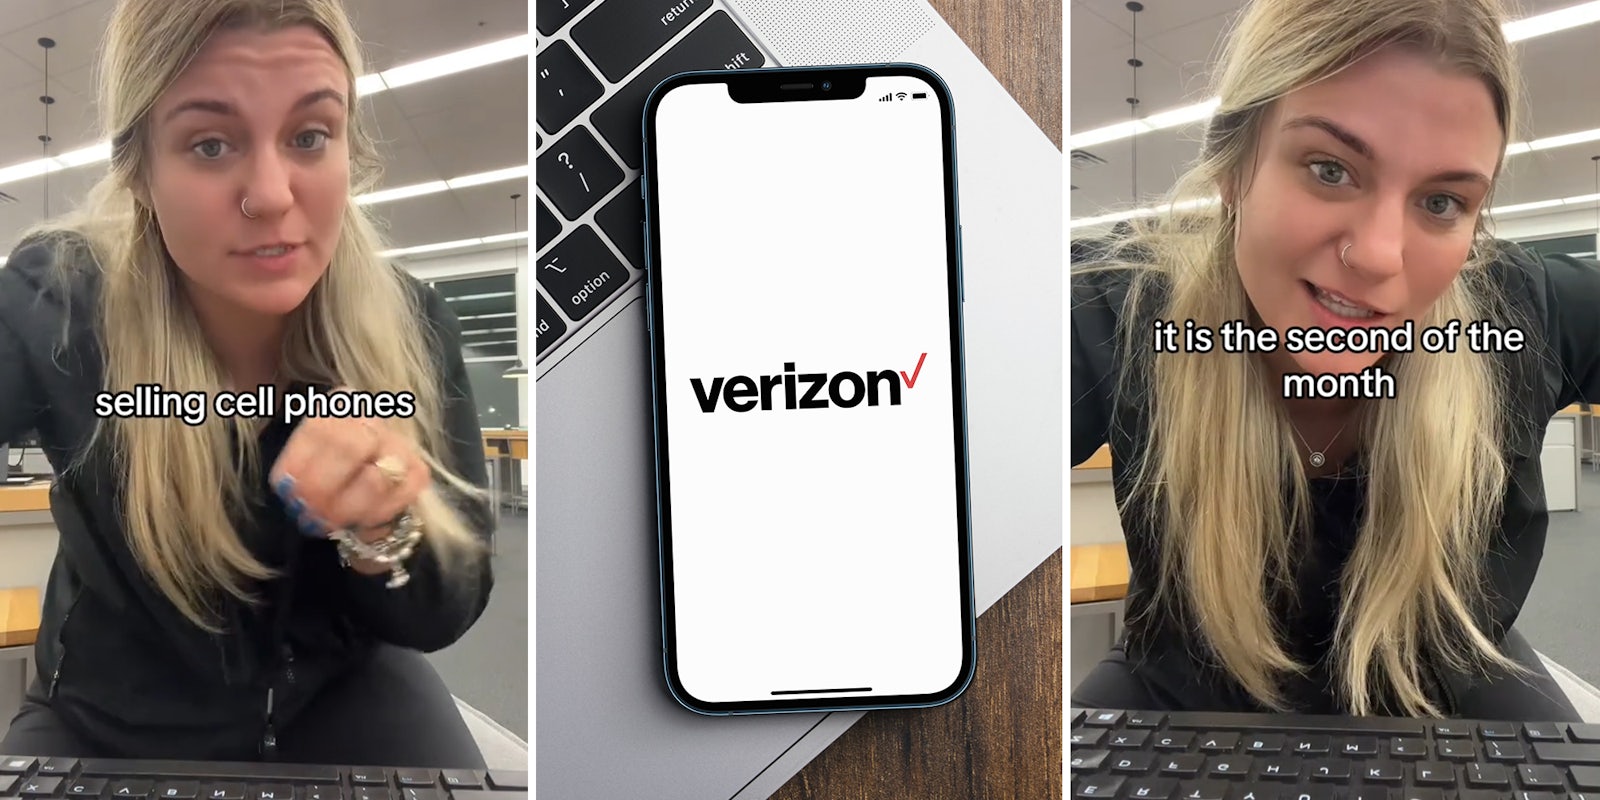 Worker says you can pocket $1,000 a day working at the Verizon Store. Is it worth it?